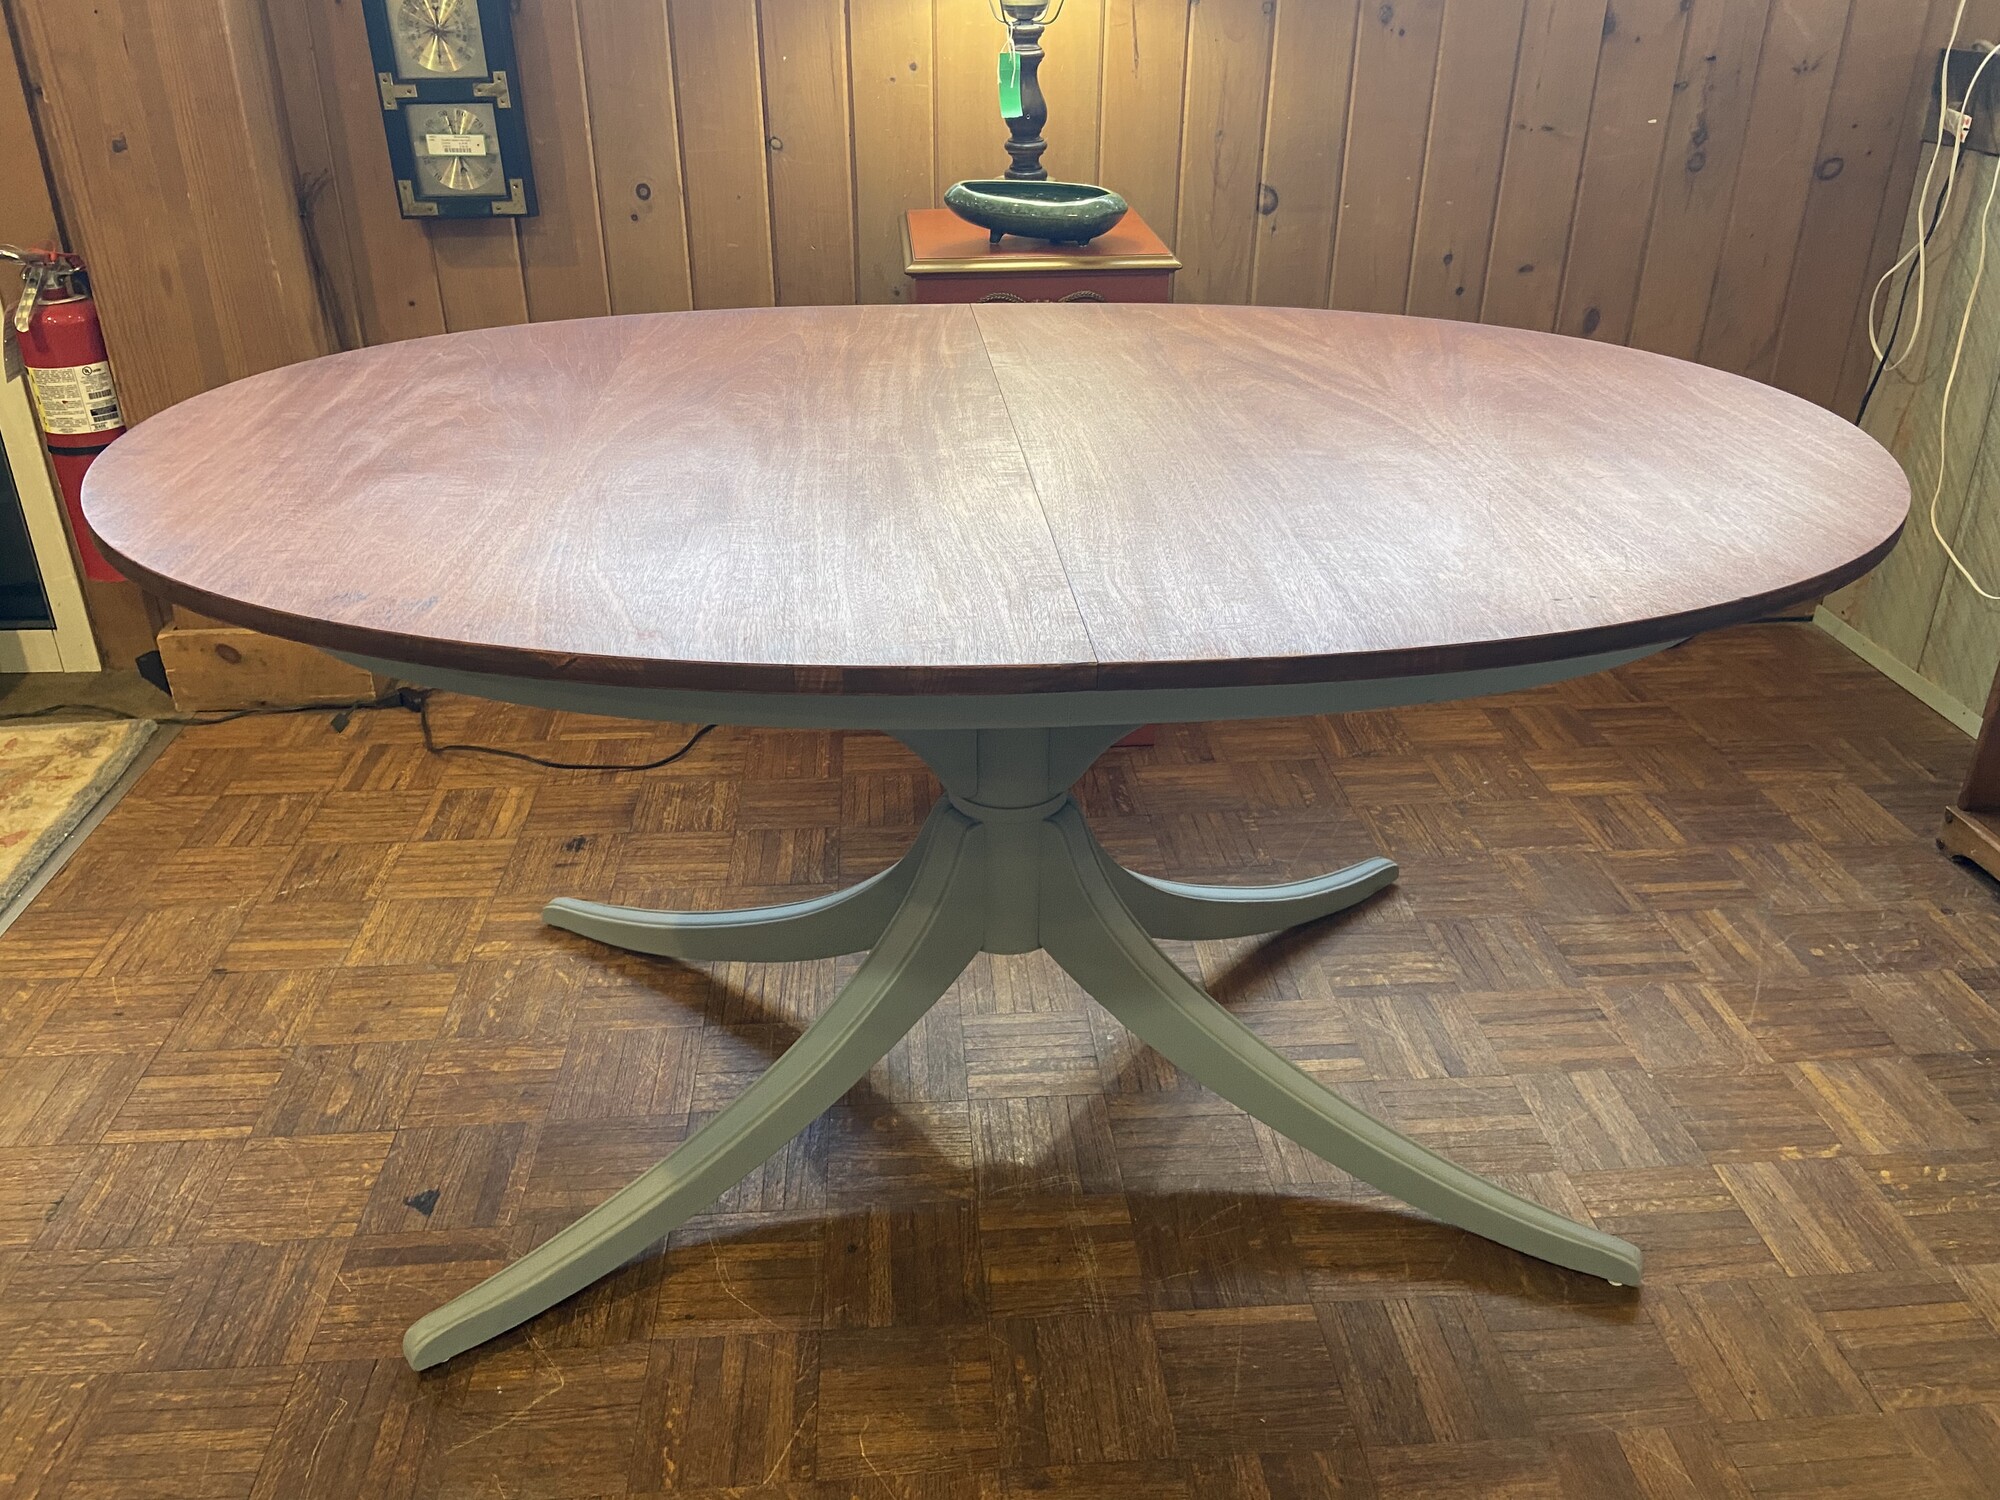 Oval Cherry Dining Table

Size: 60x42x30